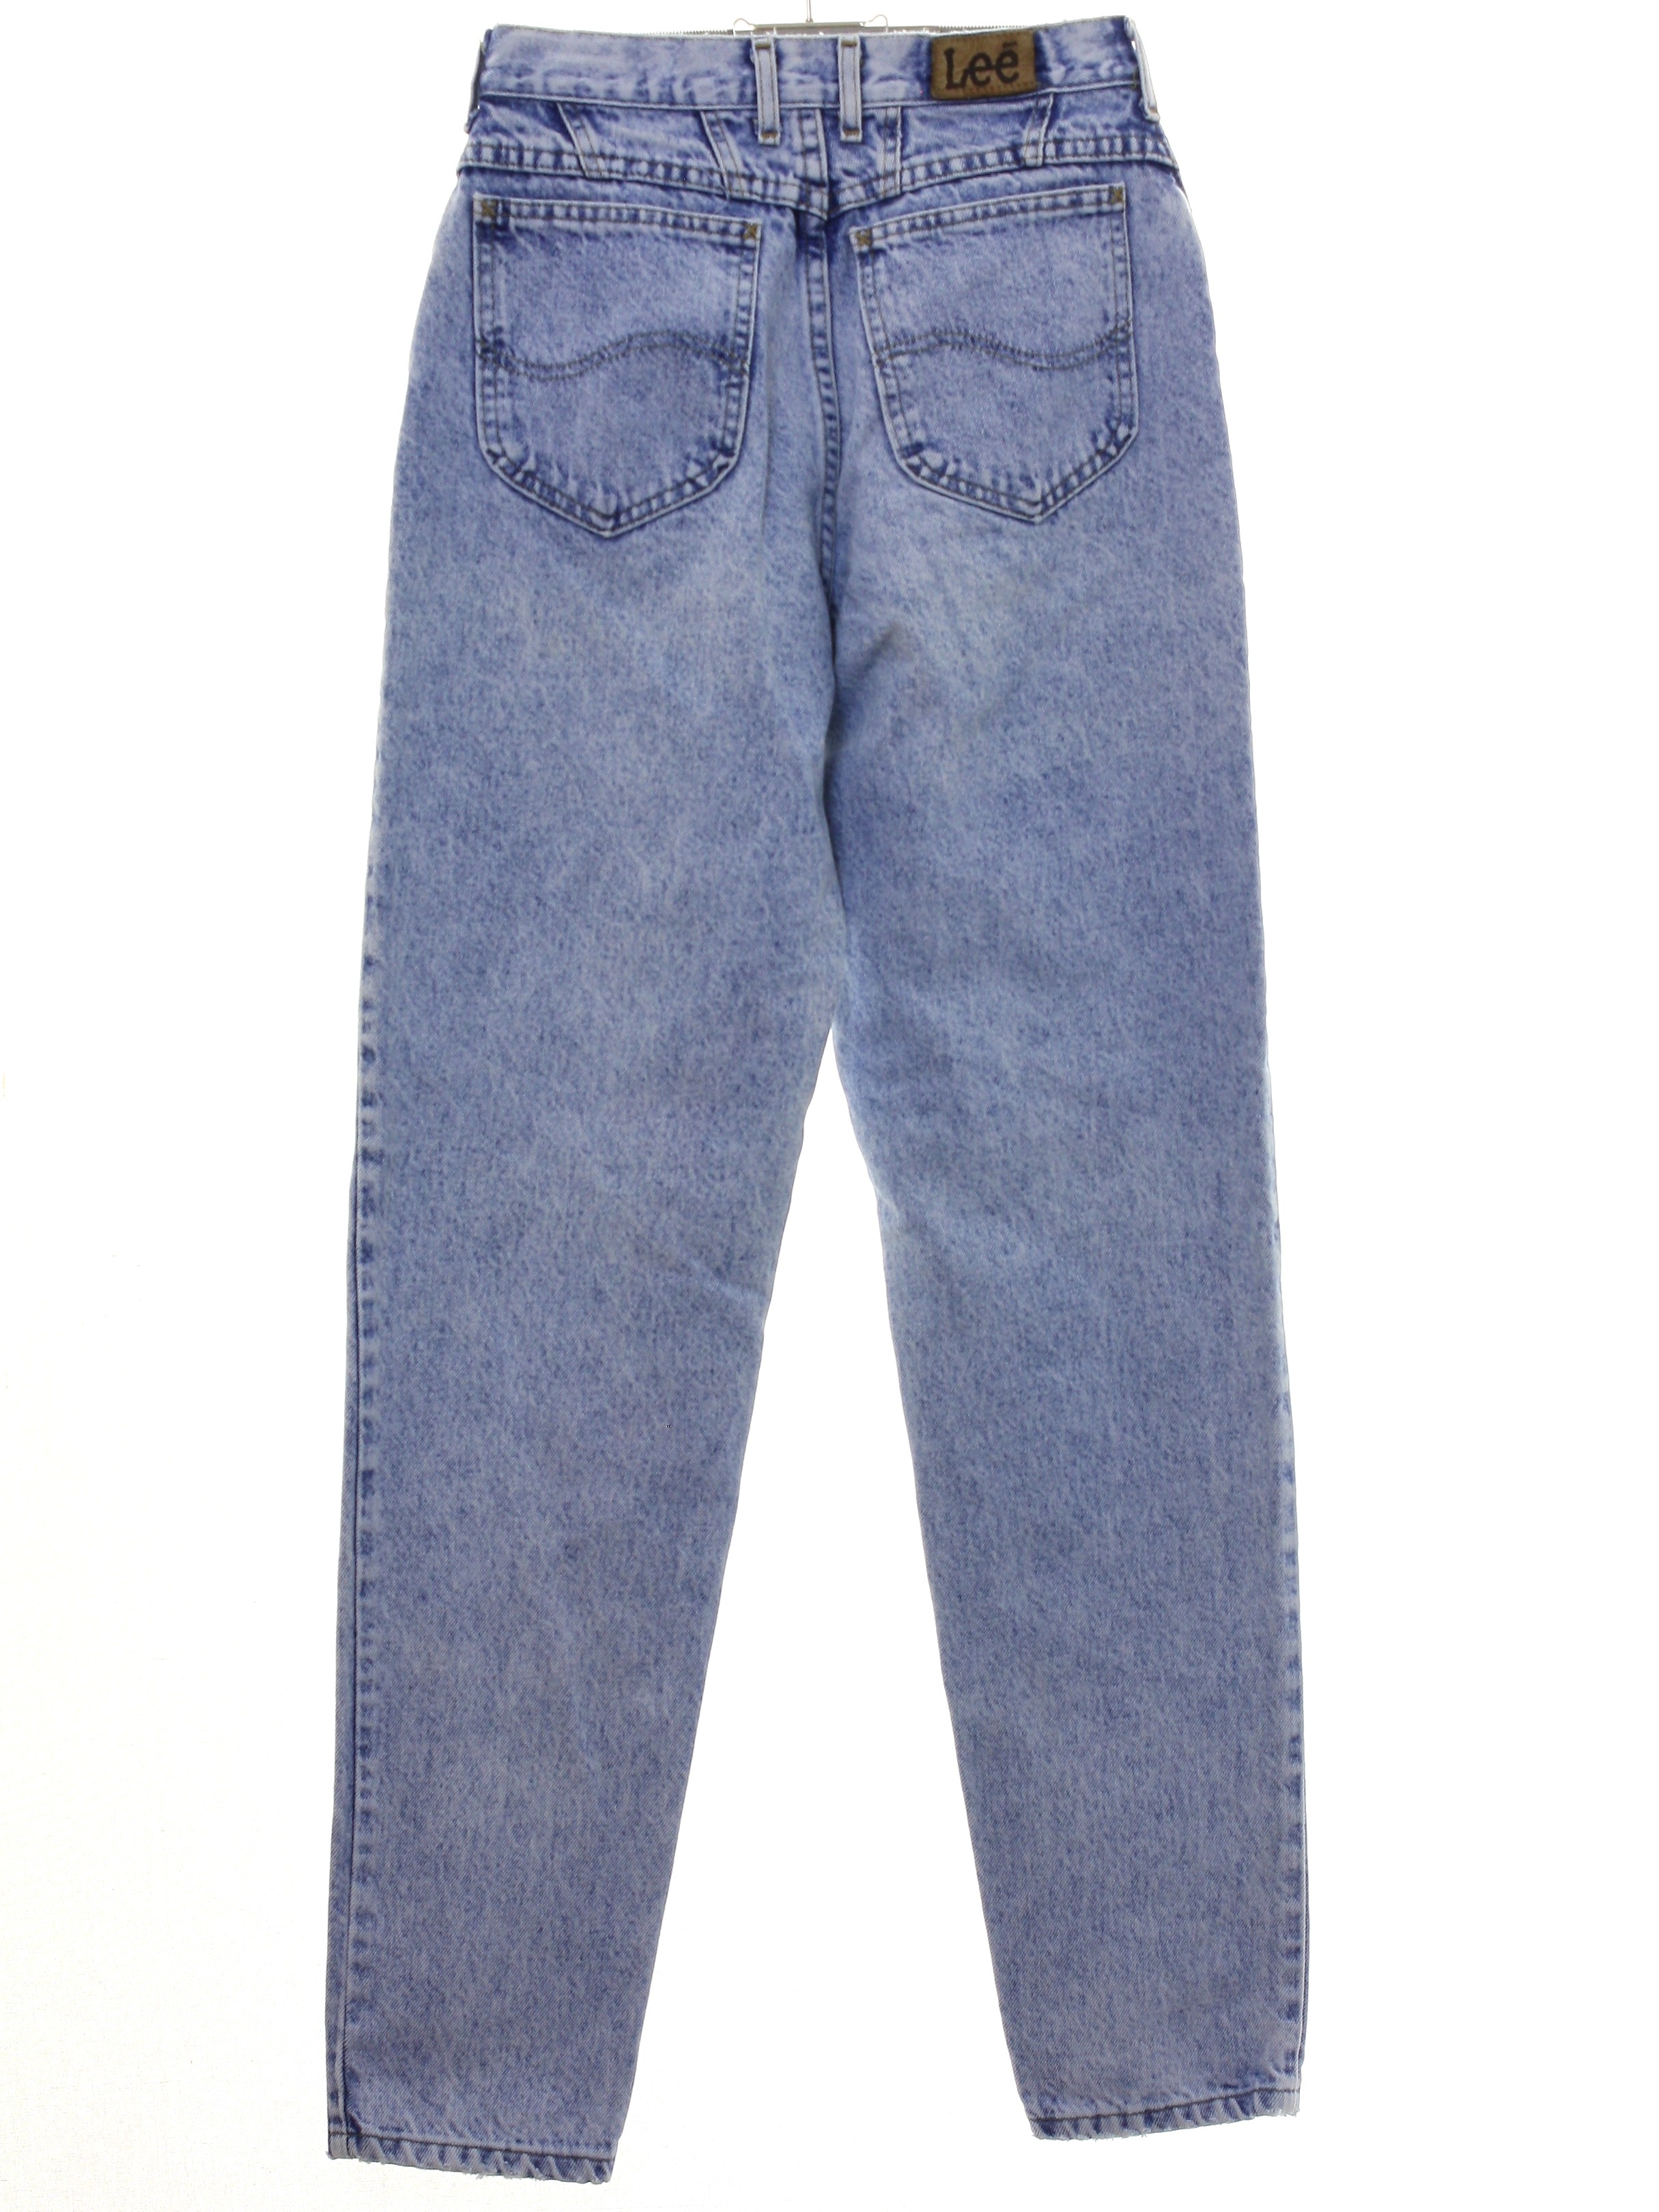 1980s Lee Pants: 80s -Lee- Womens hazy light blue cotton tapered legs  totally 80s style denim jeans pants with zipper fly closure with button.  Five pocket style - front scoop pockets with